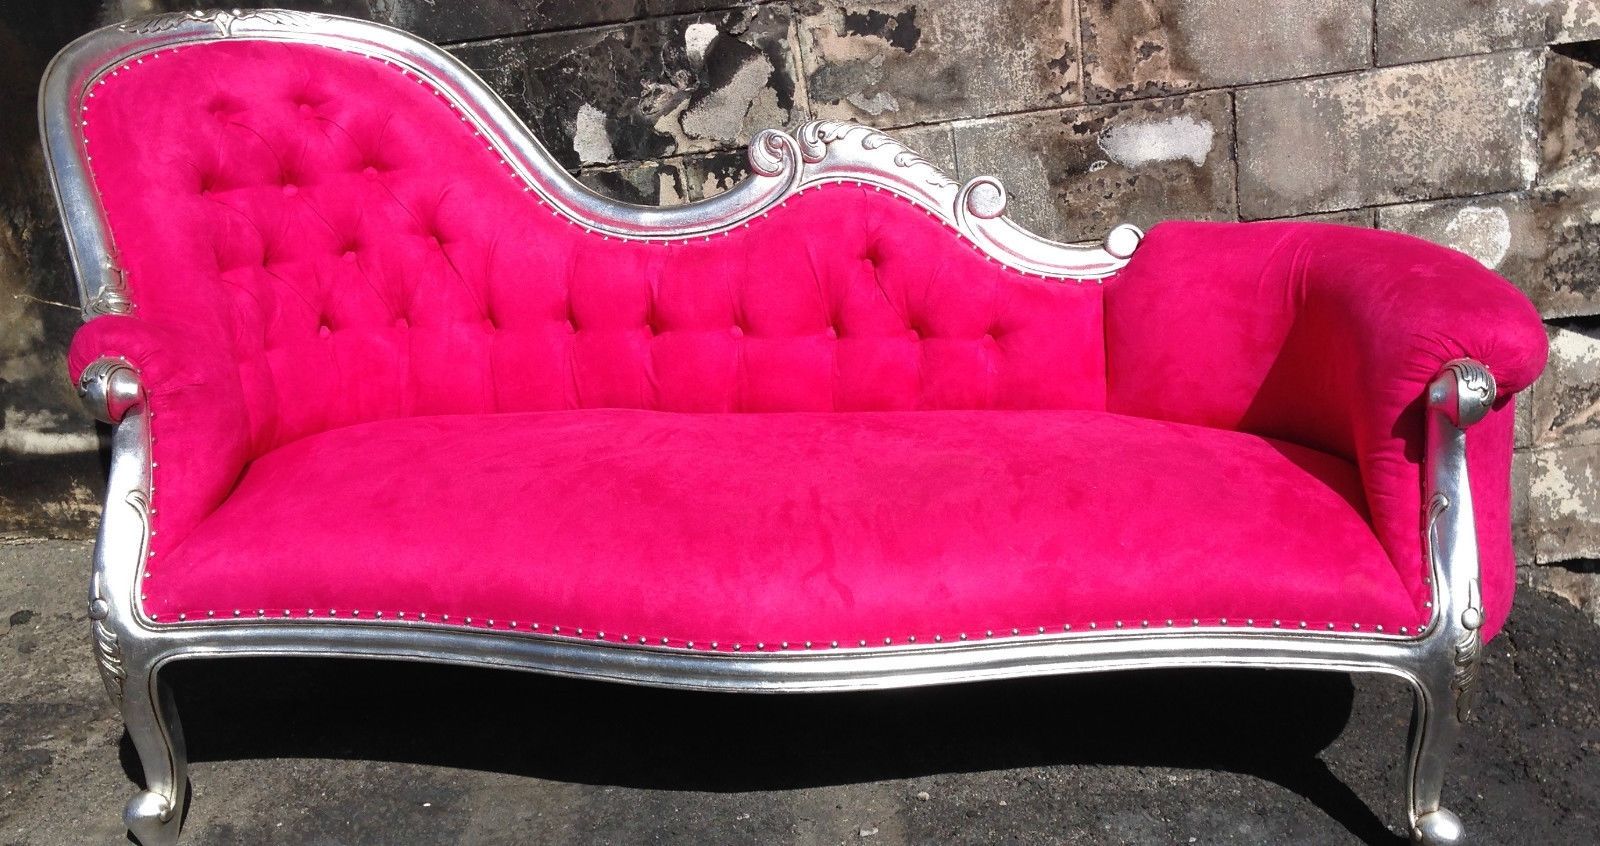 2021 Best of Hot Pink Chaise Lounge Chairs